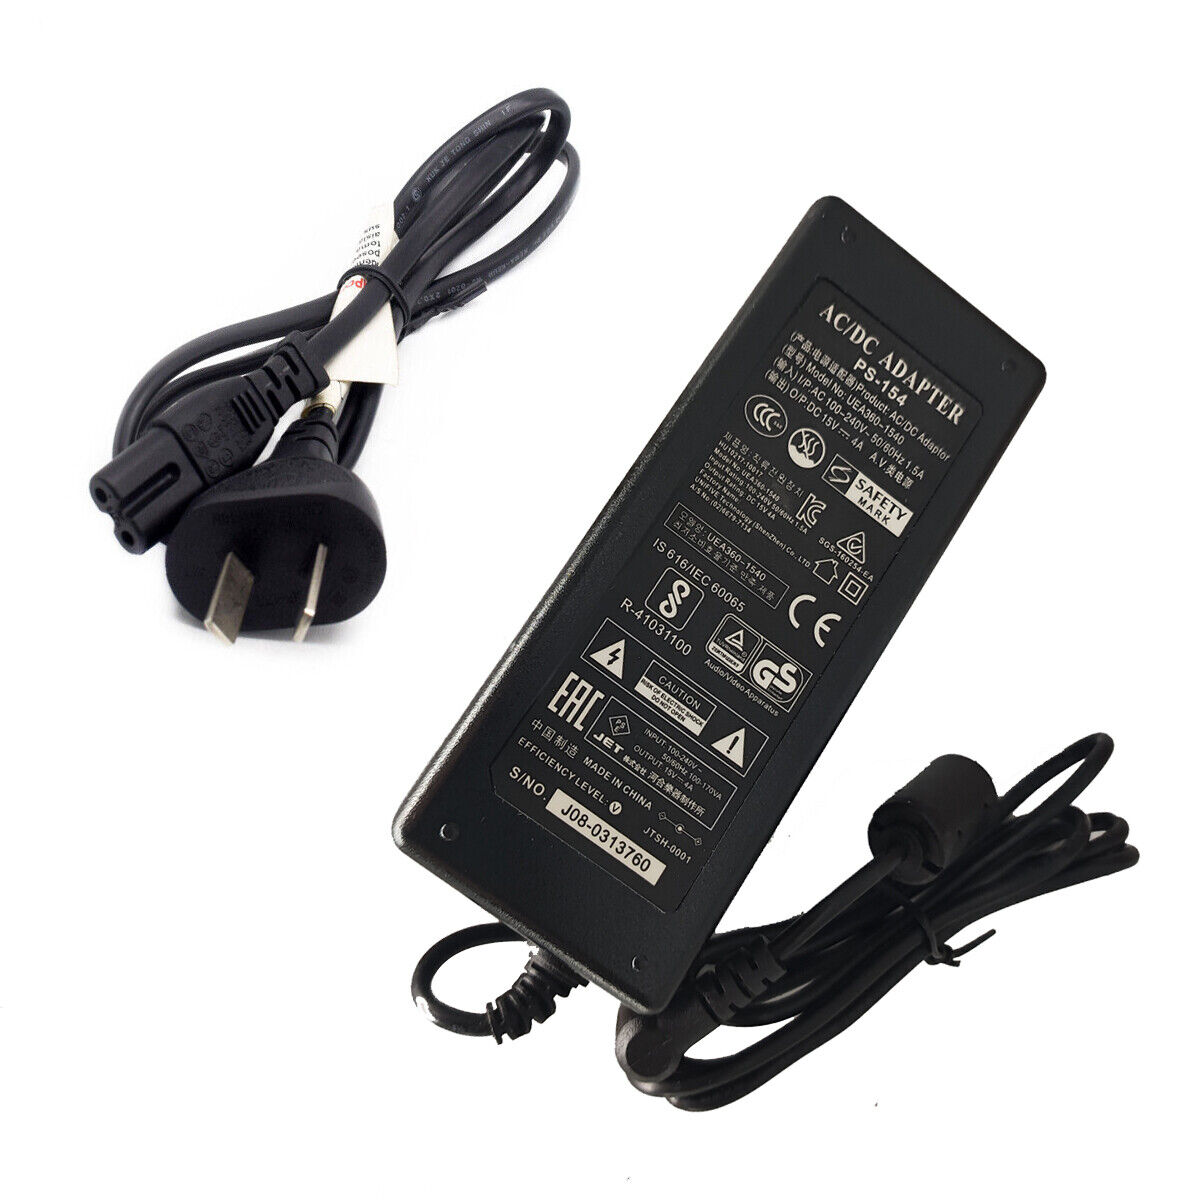 15V 4A AC Adapter for Kawai PS-154 Power Supply Cord Charger Input: 100-240V 50/6OHz Output: 15V 4A Package included